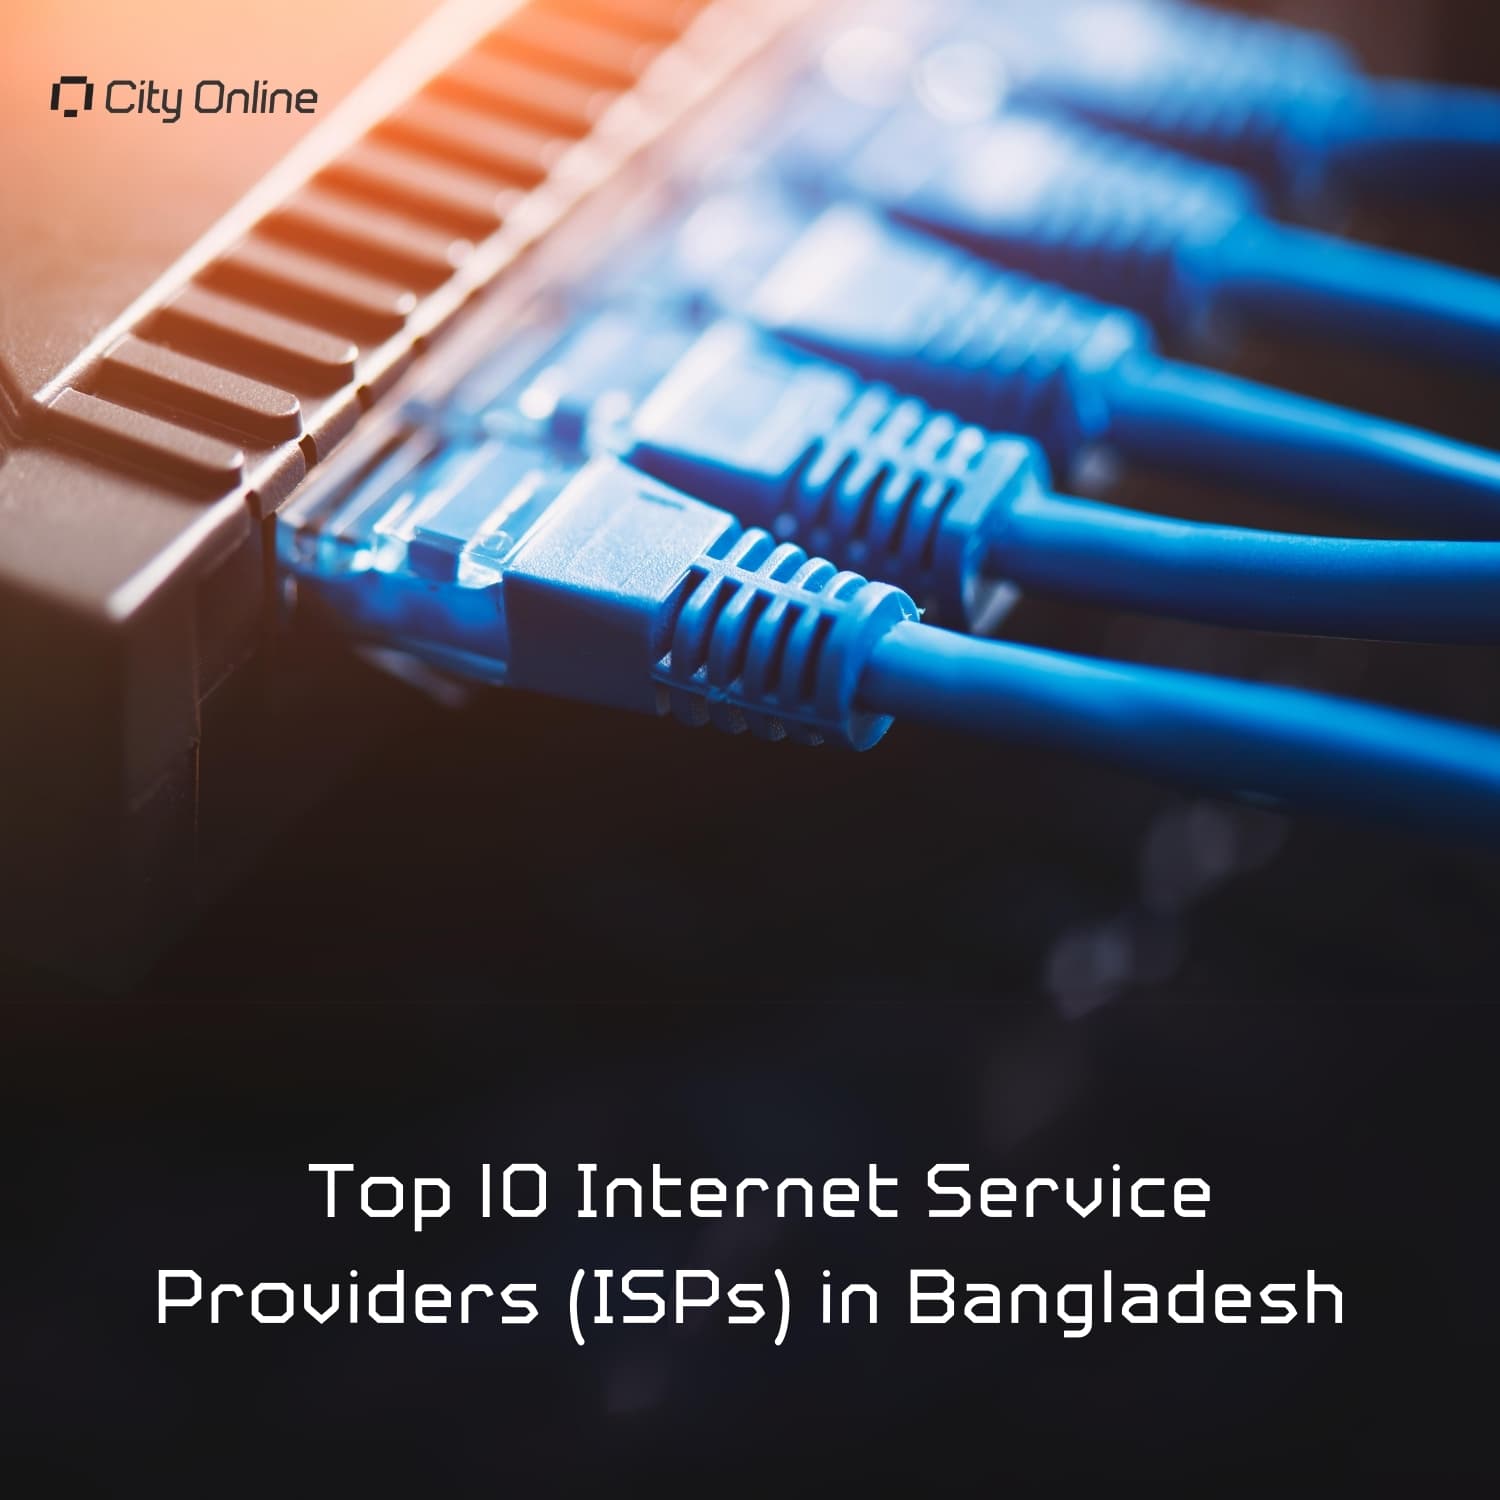 Top 10 Internet Service Providers (ISPs) in Bangladesh